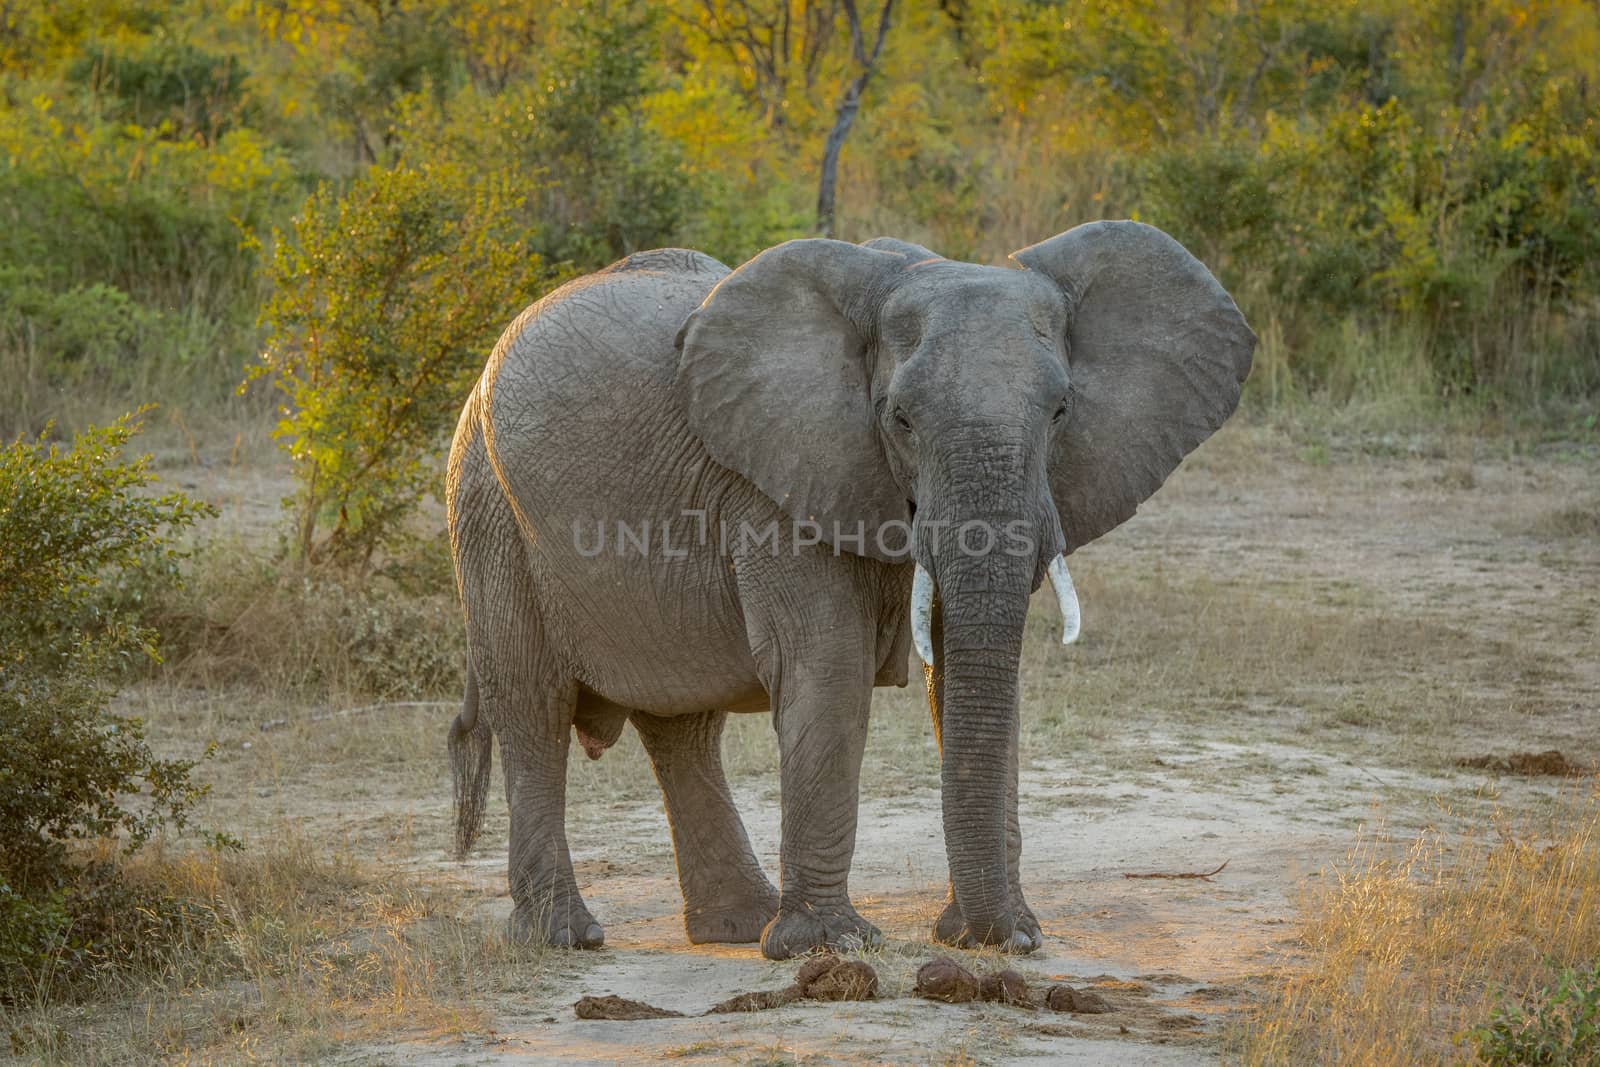 Starring Elephant in the Kruger National Park, South Africa.